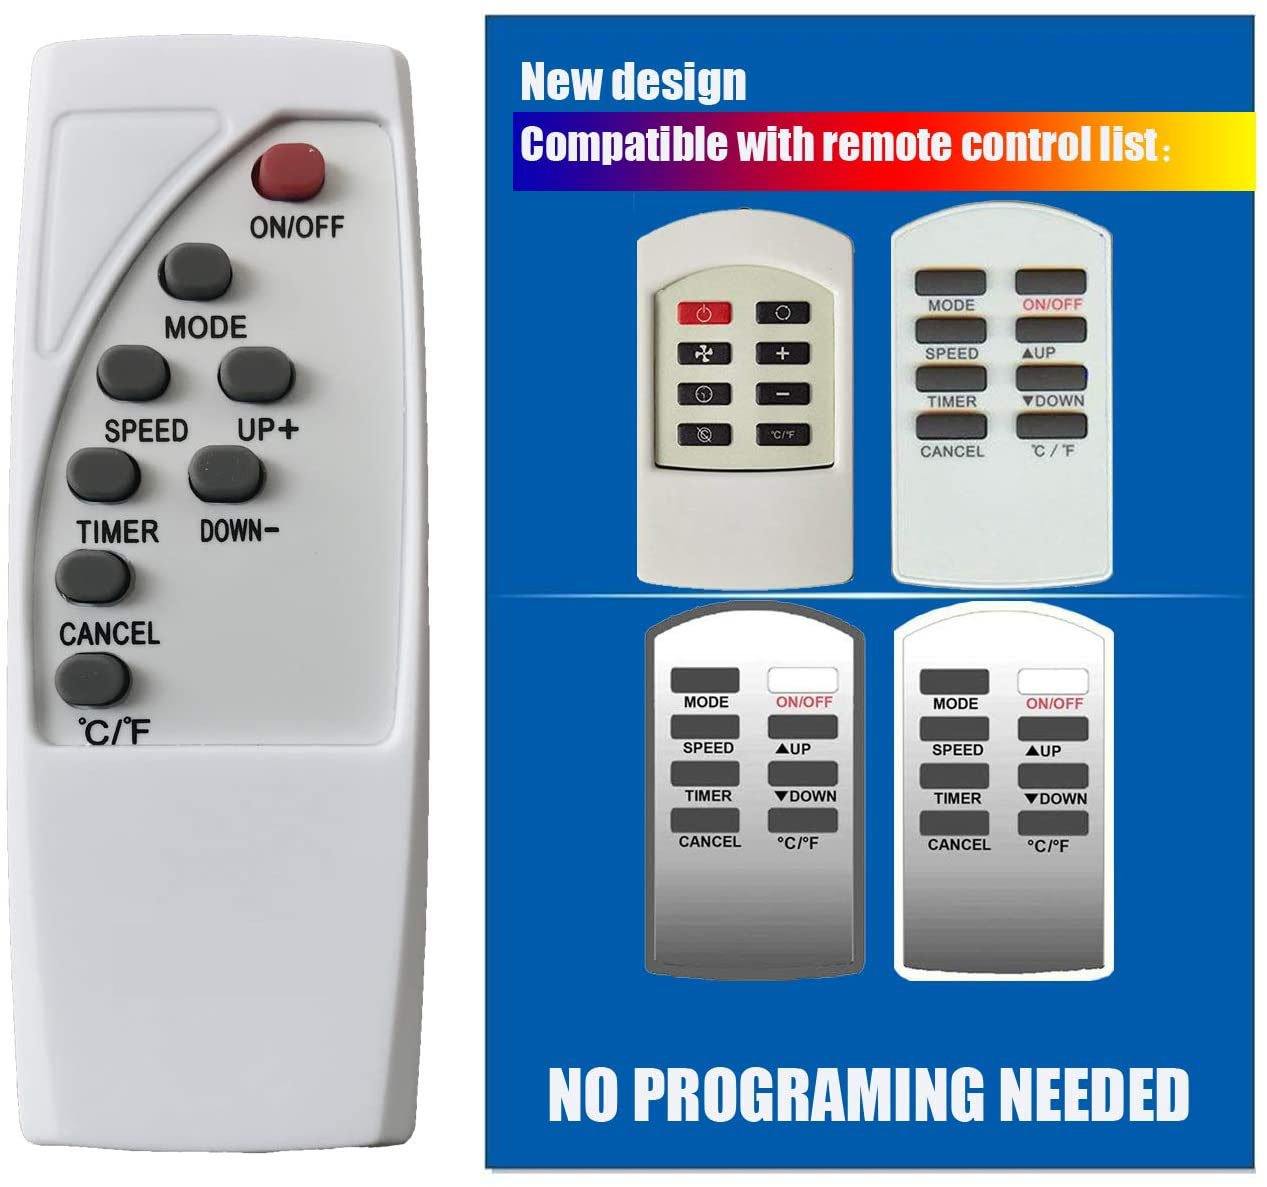 Haier Commercial Cool Air Conditioner Remote - China Air Conditioner Remotes :: Cheapest AC Remote Solutions